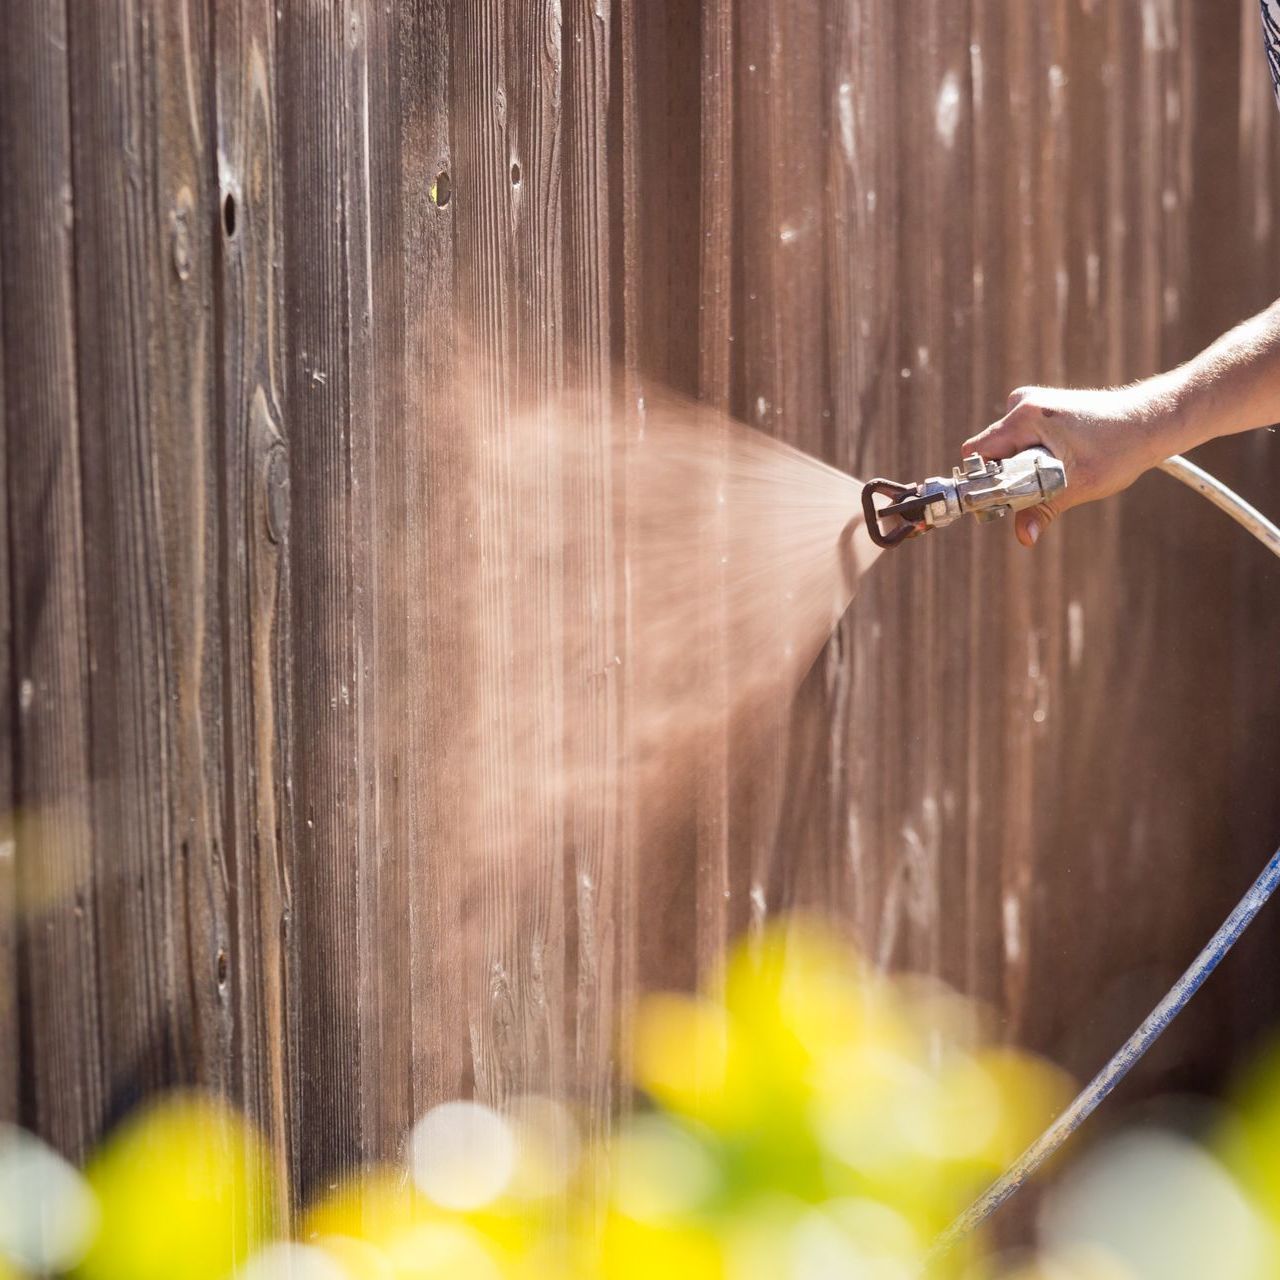 A person is spraying a wooden fence with a hose.